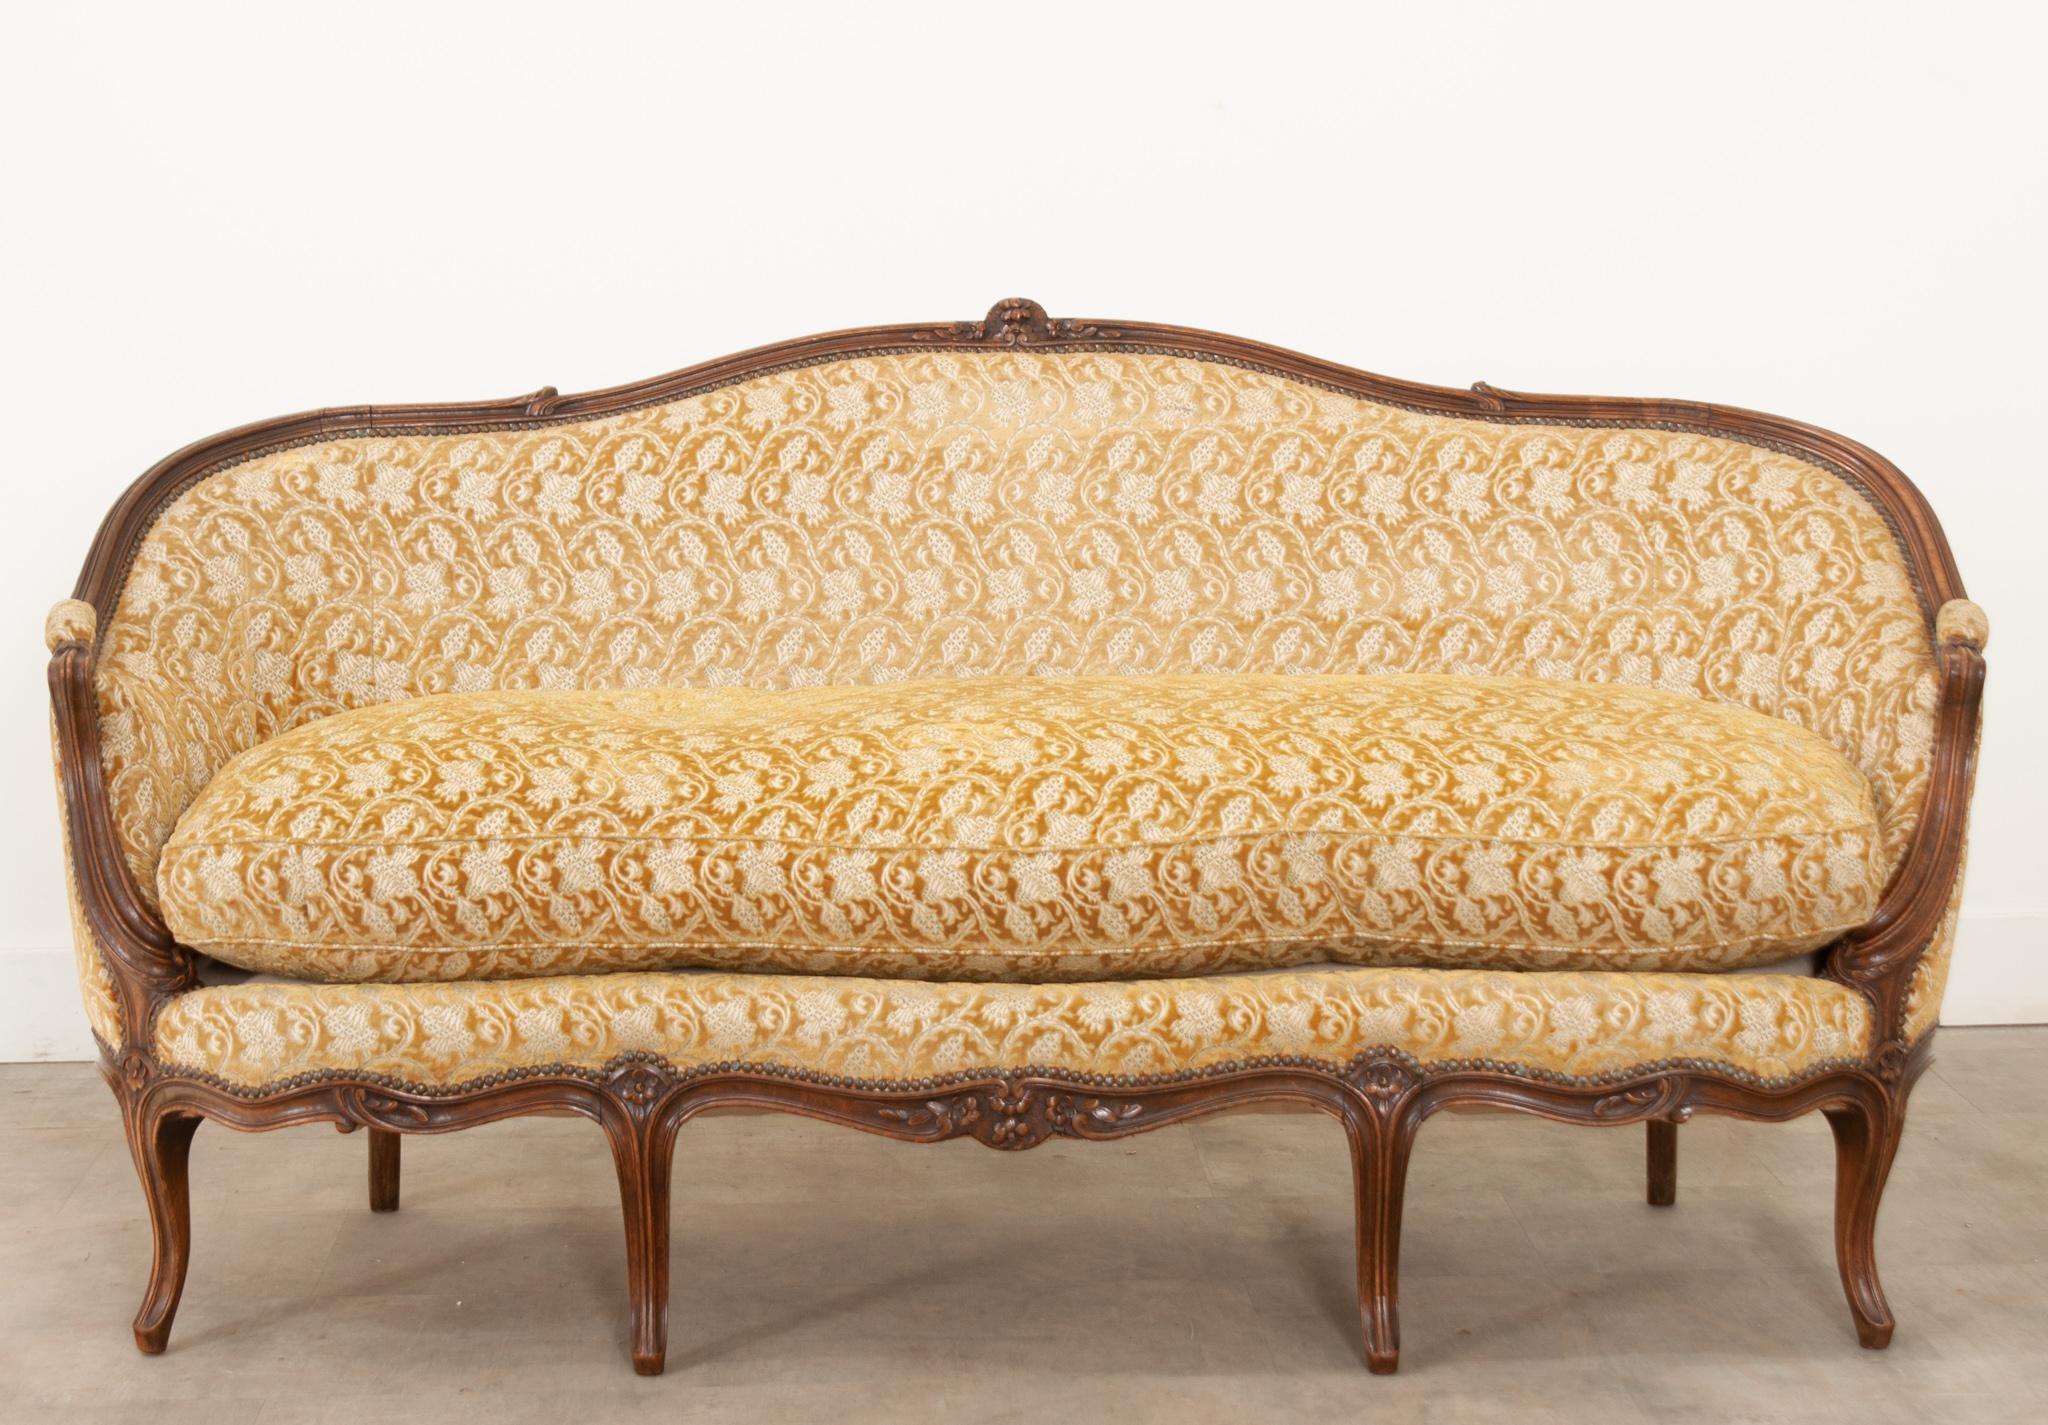 This elegant and comfortable settee was crafted in 19th century France and features beautiful cut velvet upholstery in a gorgeous botanical print and goldenrod color.  The carved walnut frame is rich in tone and has deep curving trim, florals, and